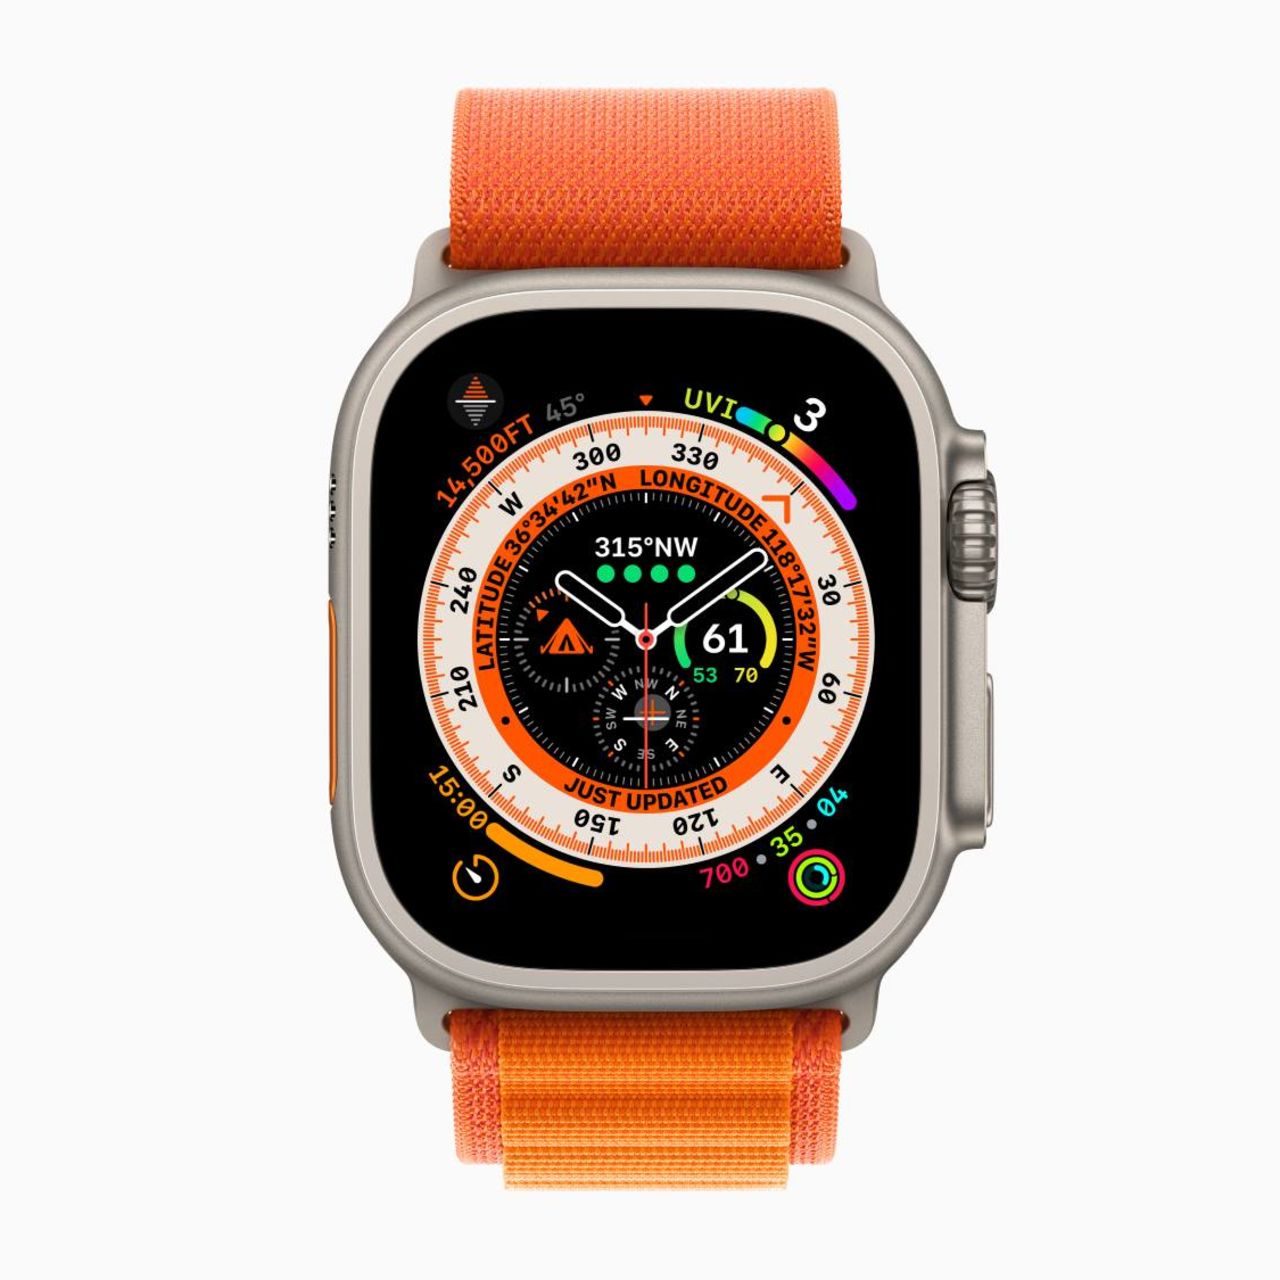 This Garmin does things the Apple Watch Ultra can't, and now it's